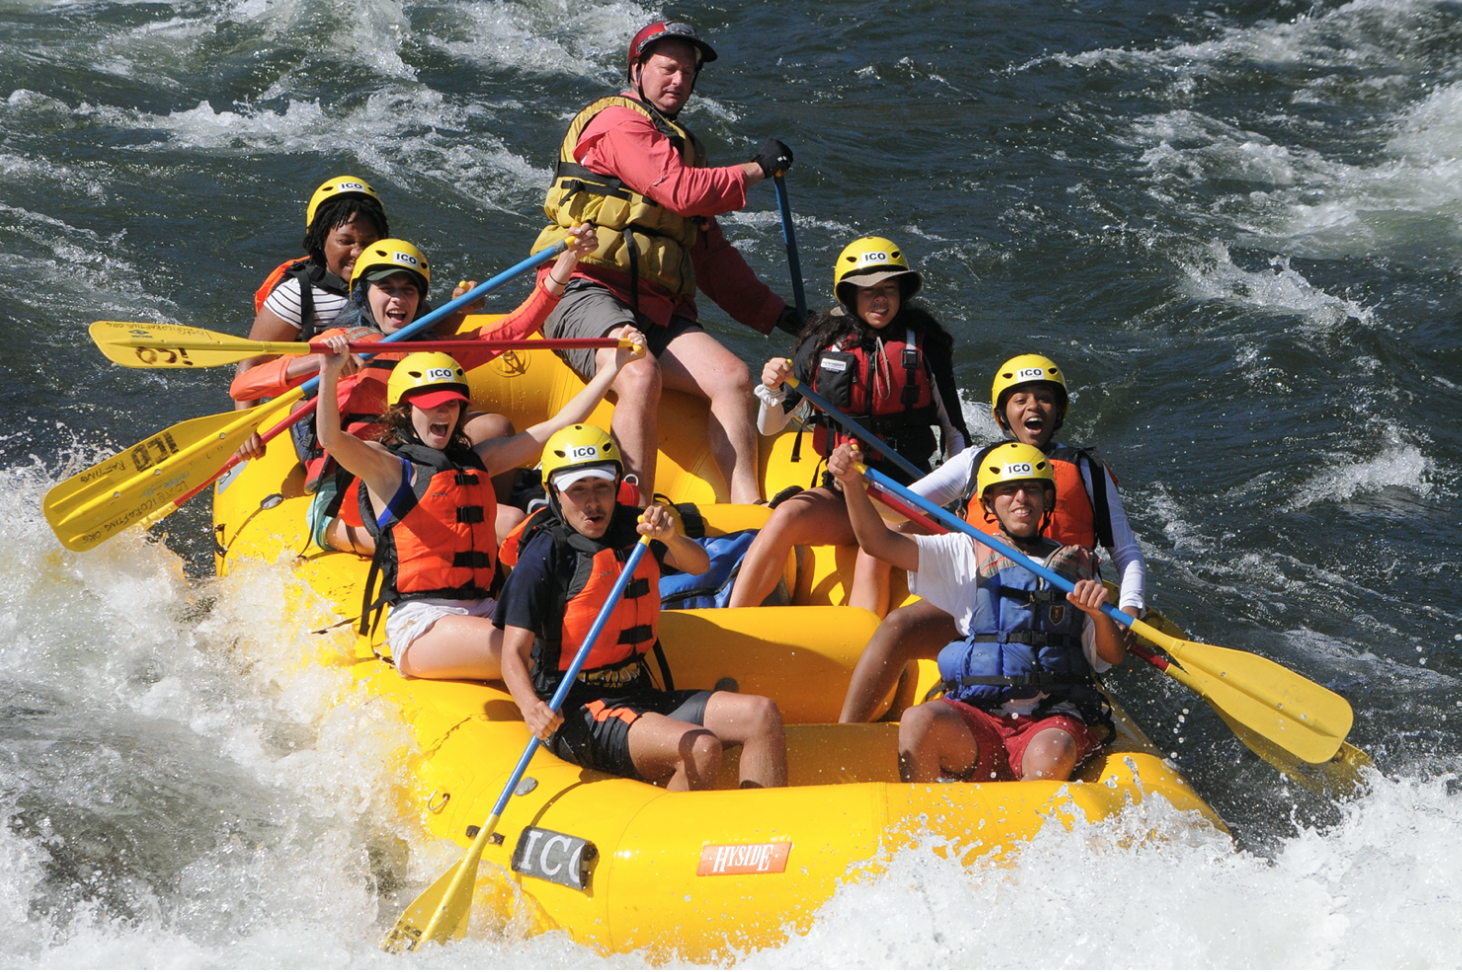 A youth group rafting down a river